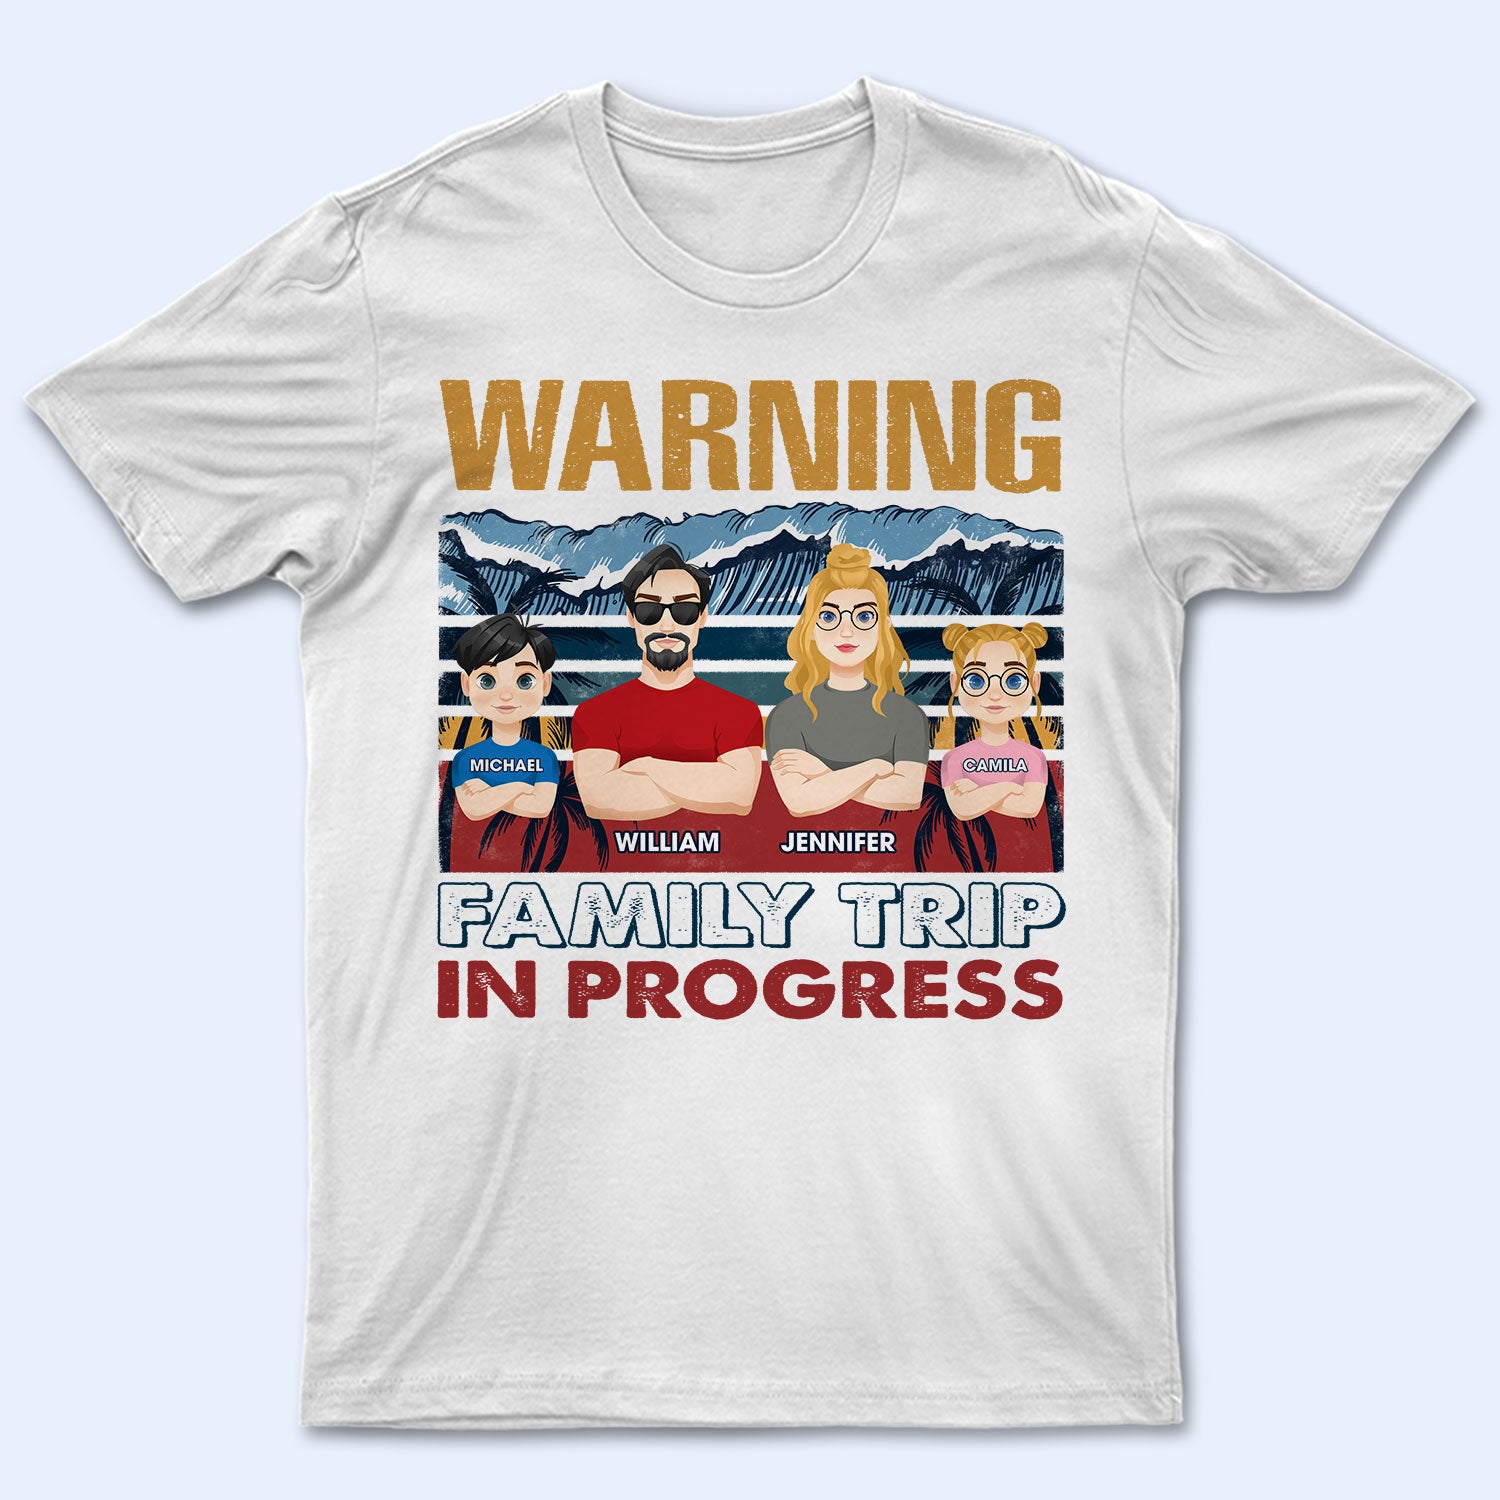 Warning Family Trip In Progress - Birthday, Loving Gift For Husband, Wife, Couples, Dad, Mom - Personalized Custom T Shirt